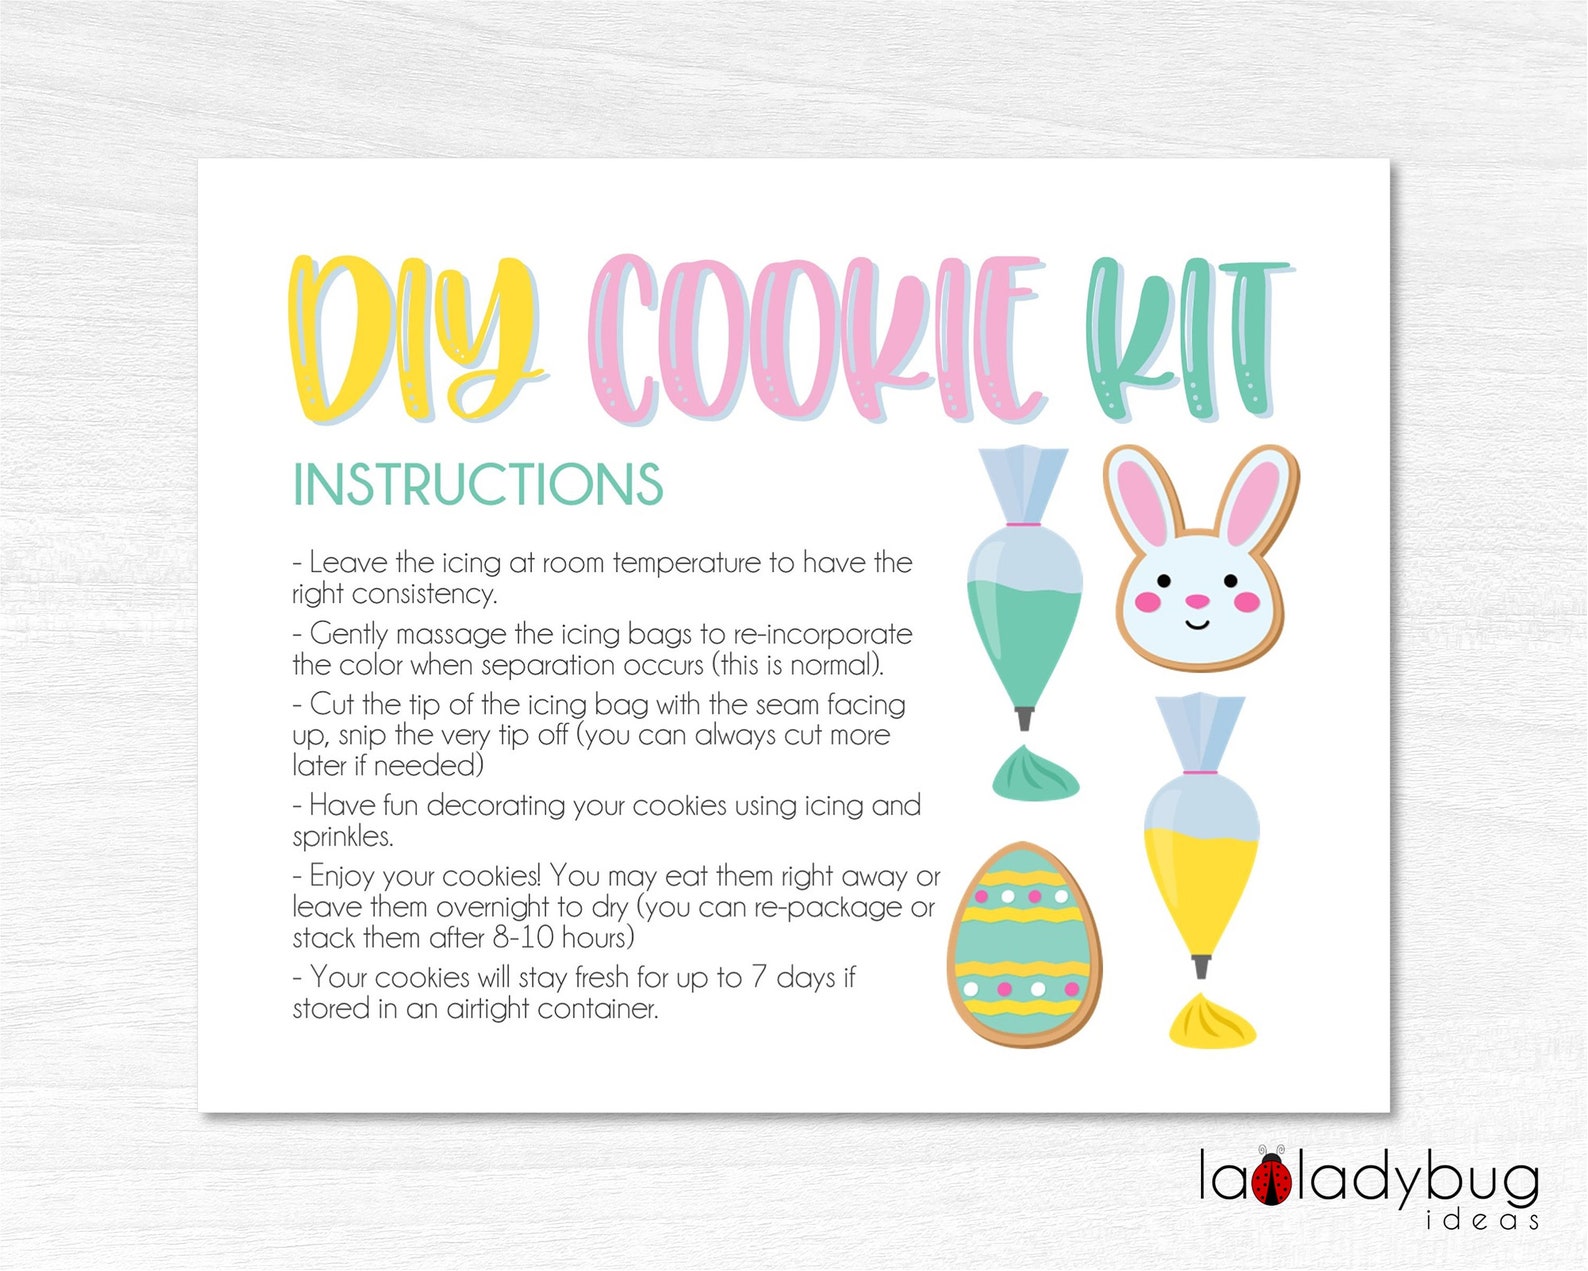 easter-diy-cookie-kit-instructions-printable-instructions-etsy-canada